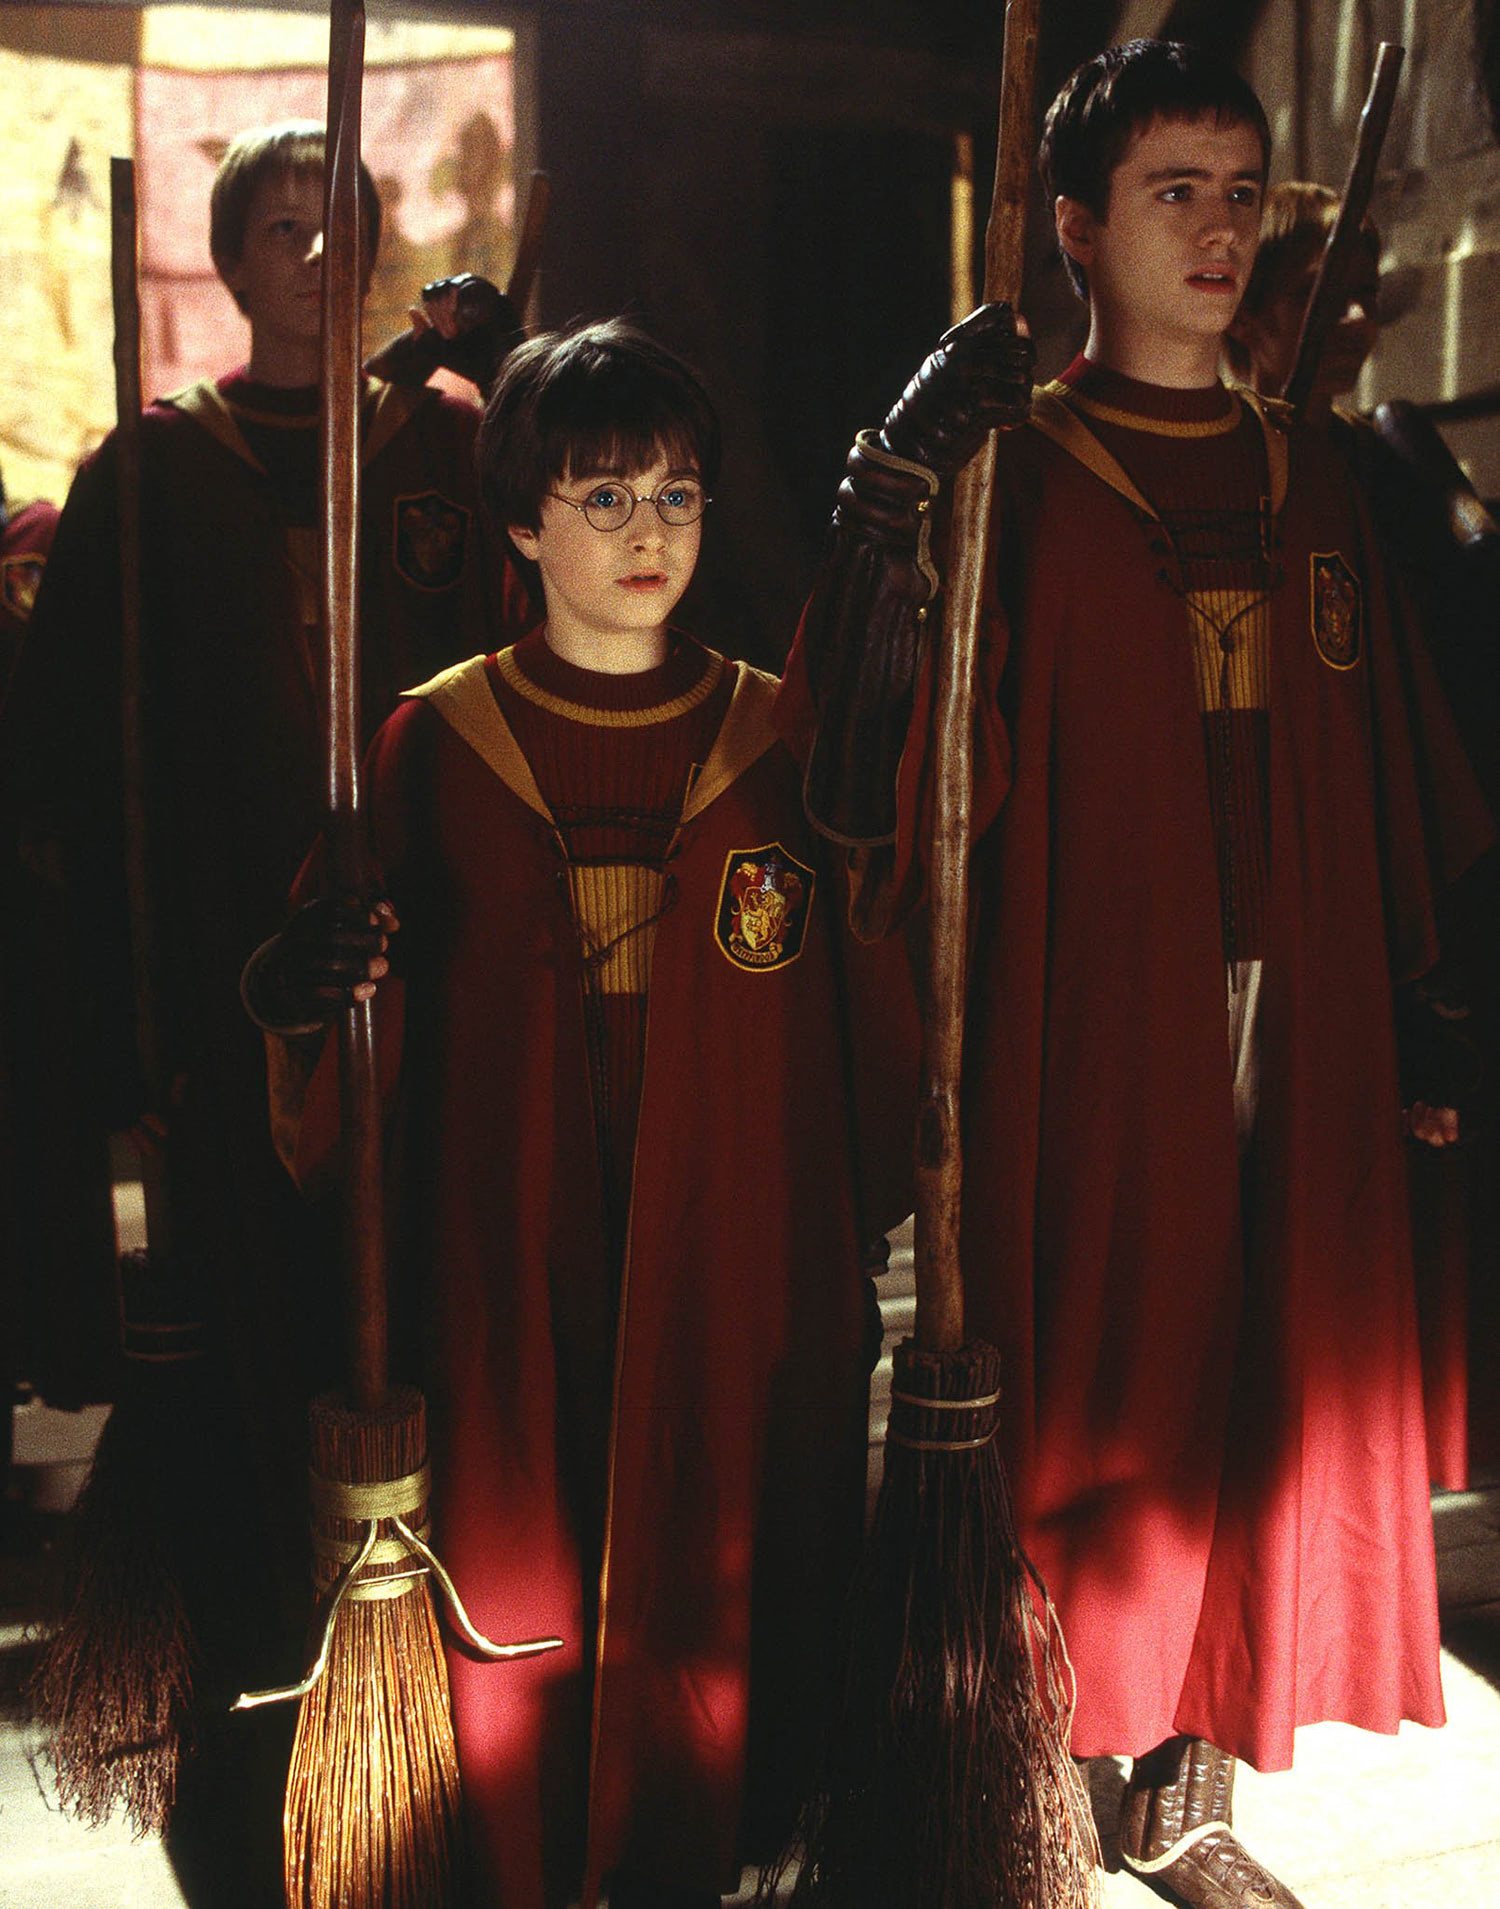 Harry and Wood prepare for Quidditch